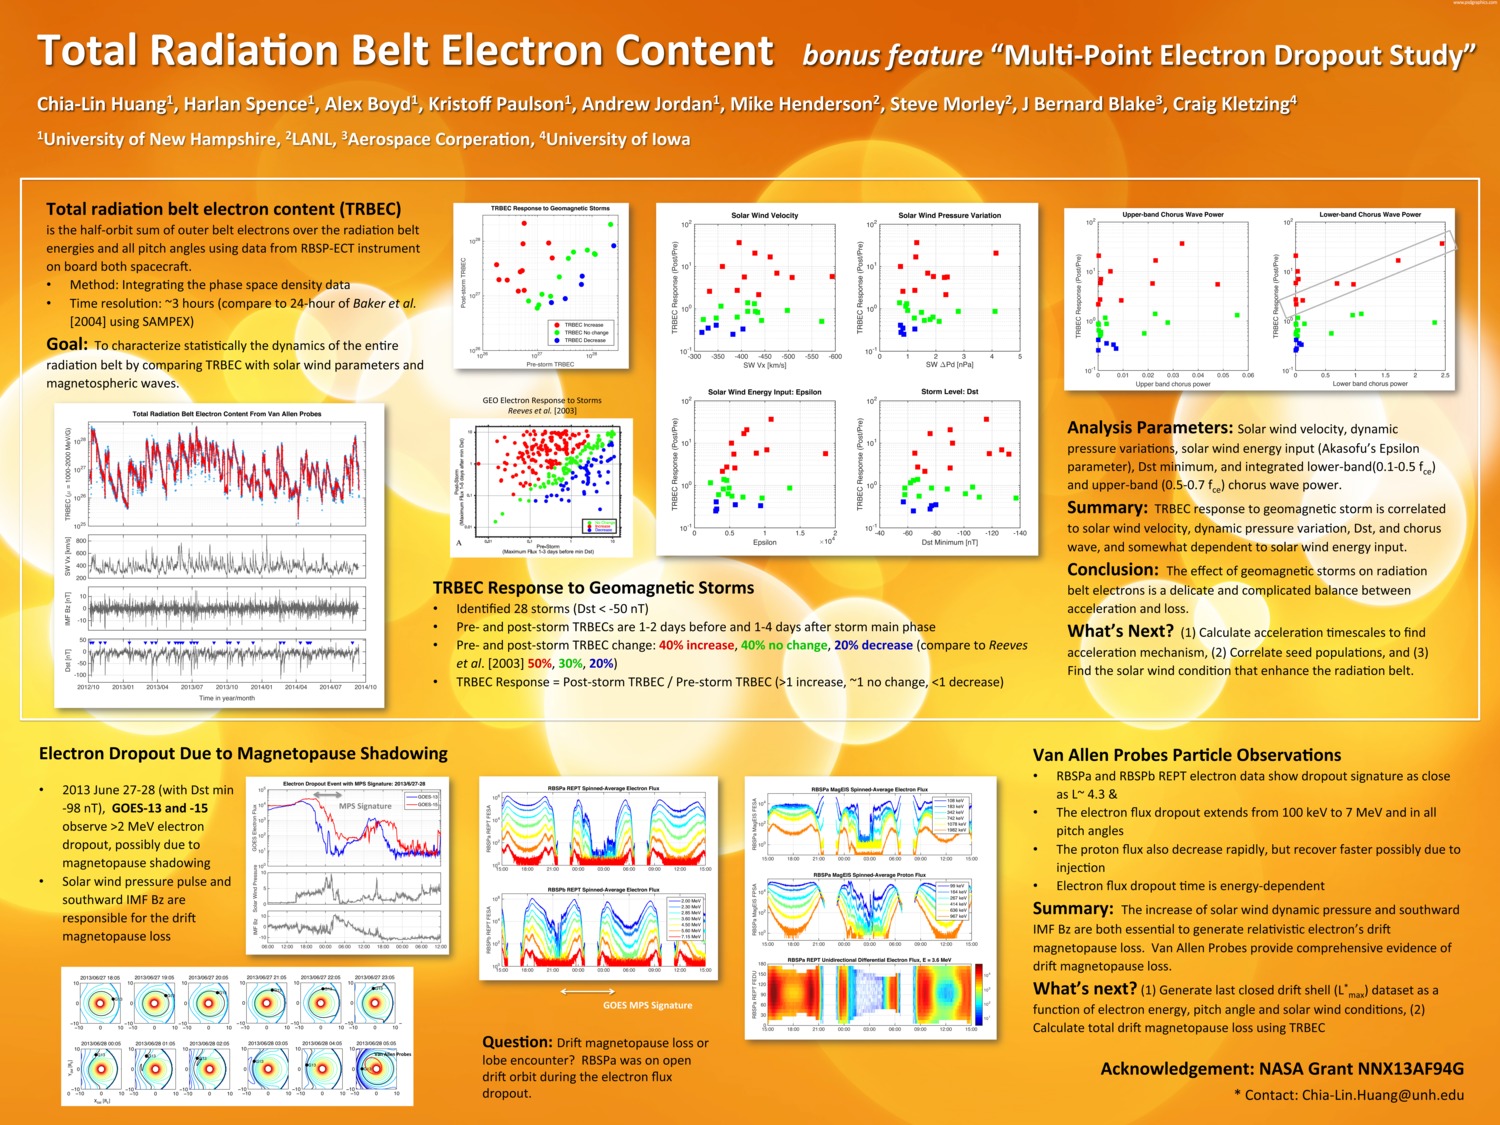 Total Radiation Belt Electron Content by clhuang